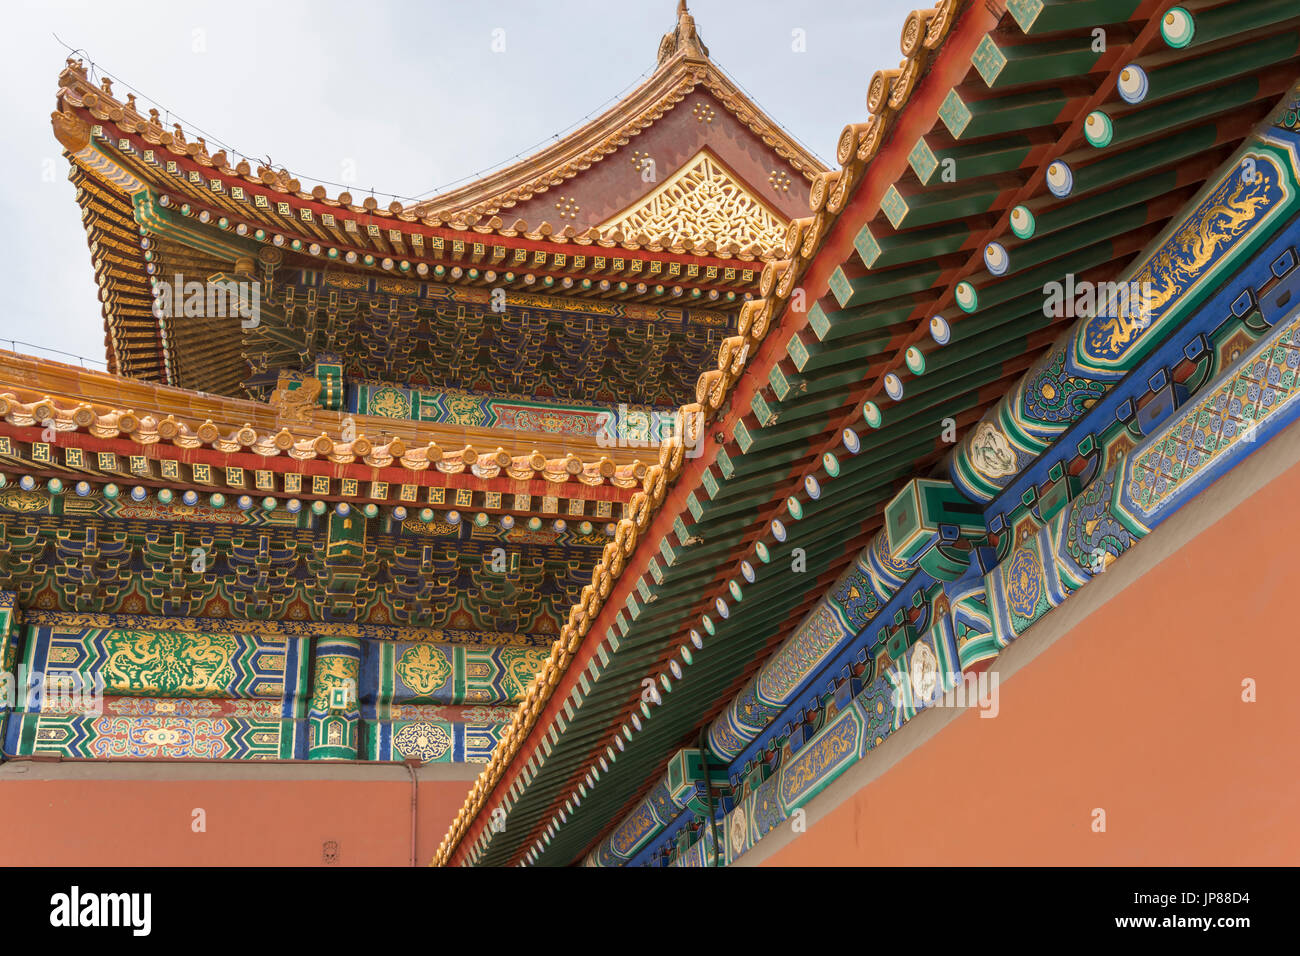 Closeup showing intricate design of roof and eaves of Hall of Supreme Harmony in Forbidden City in Beijing China Stock Photo